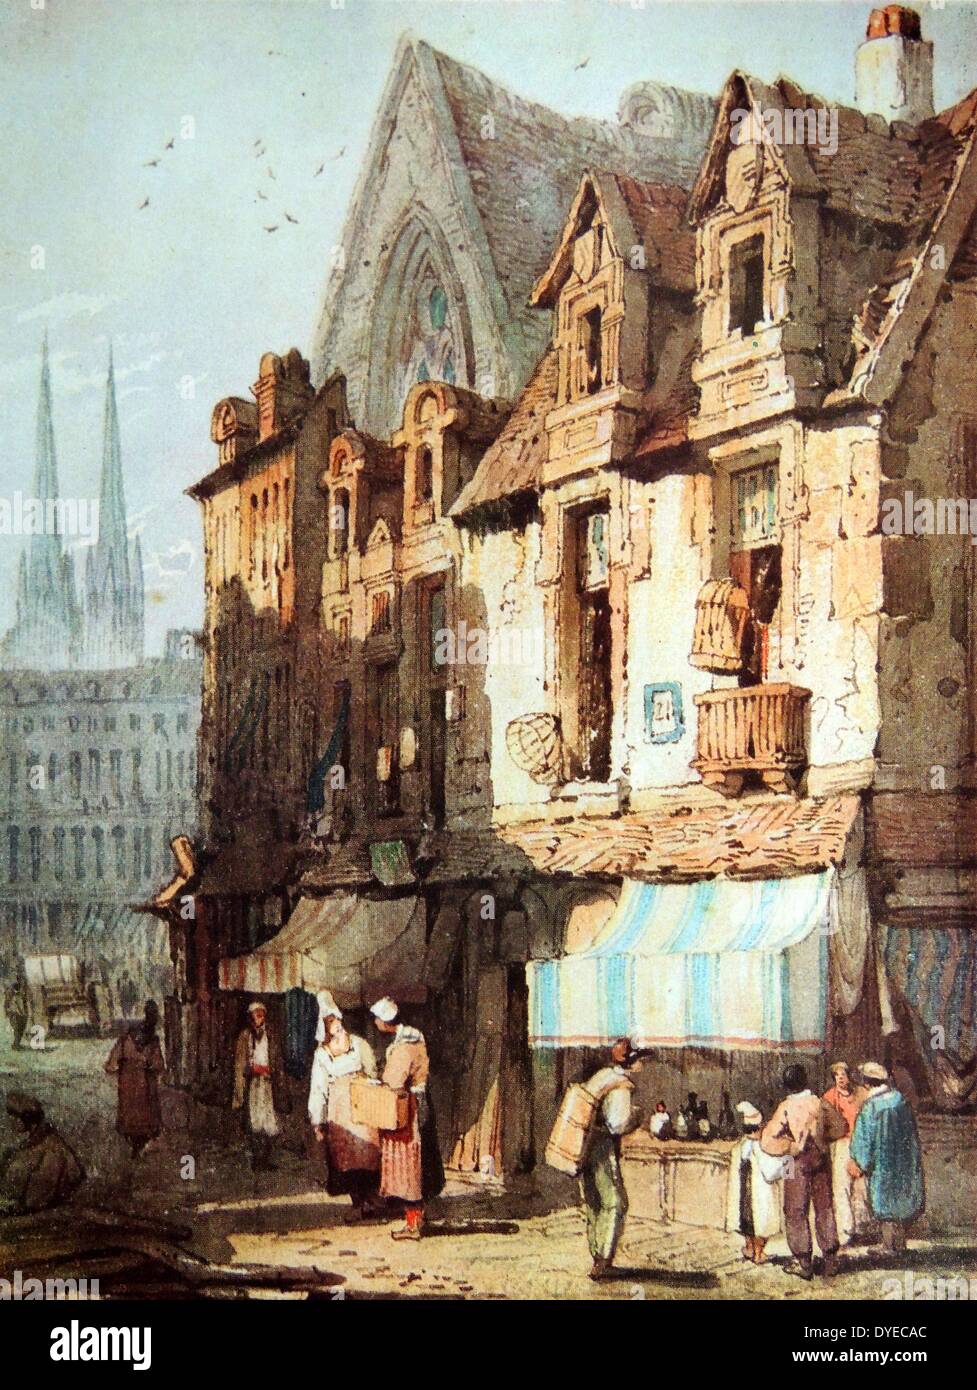 Watercolour painting of a busy Market Street in Normandy. In the background of the painting the spires of a Cathedral can be seen. By Samuel Prout (1783 - 1852). British water-colourist and architectural painter. Dated 1827 Stock Photo